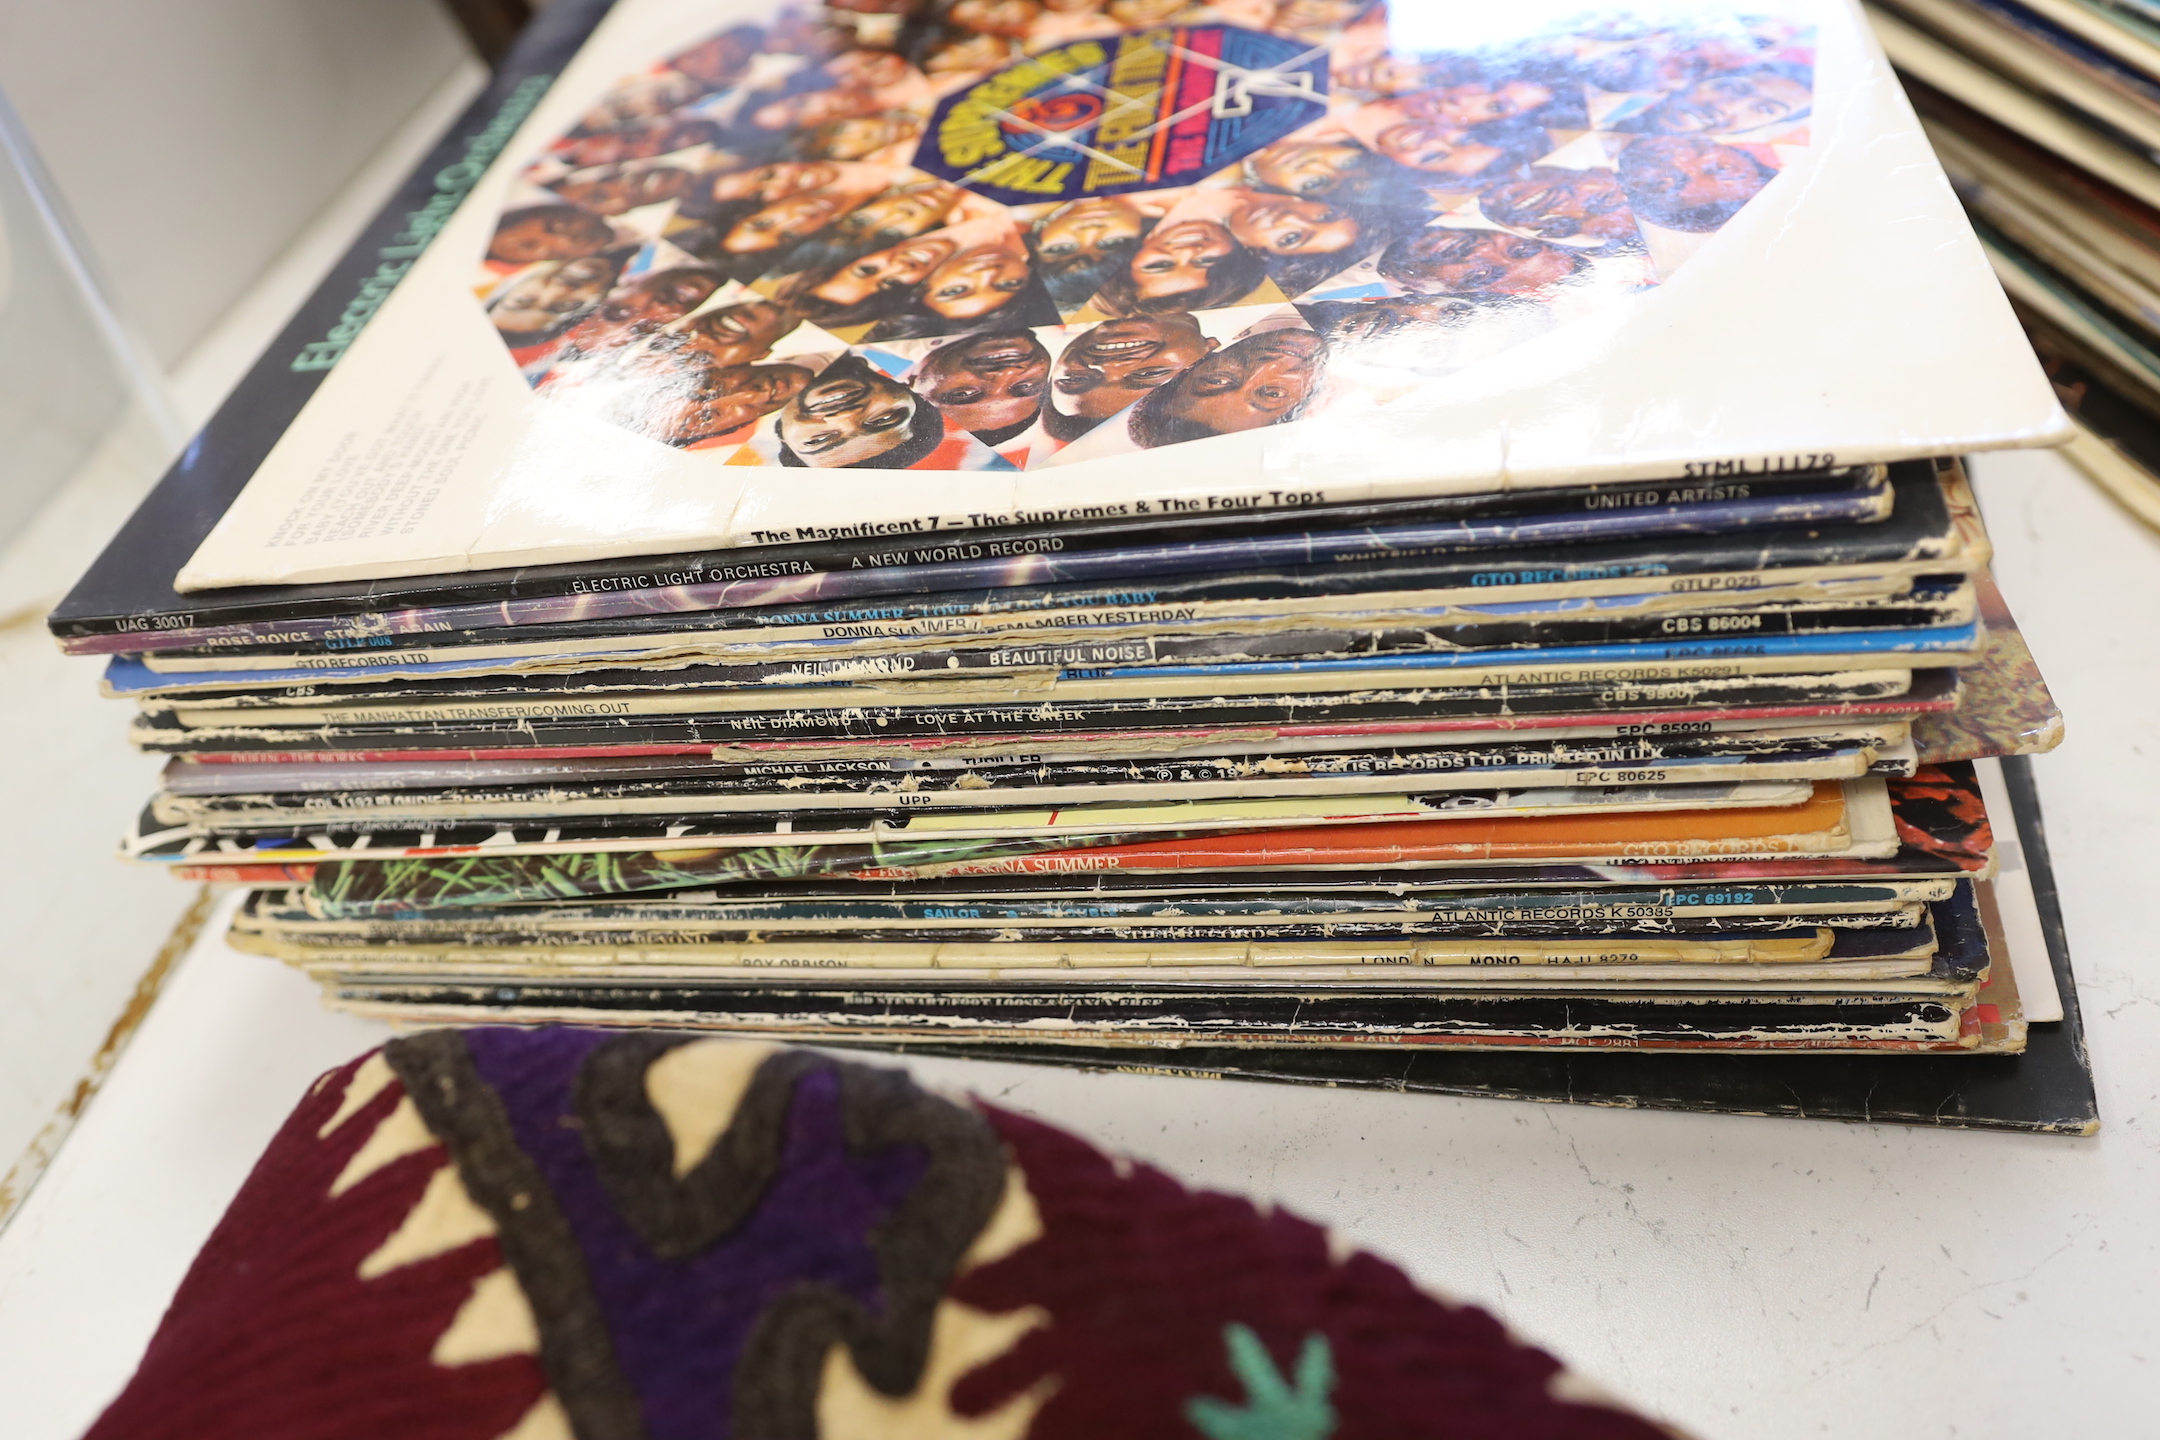 A quantity of various records, to include ABBA, Genesis, etc.